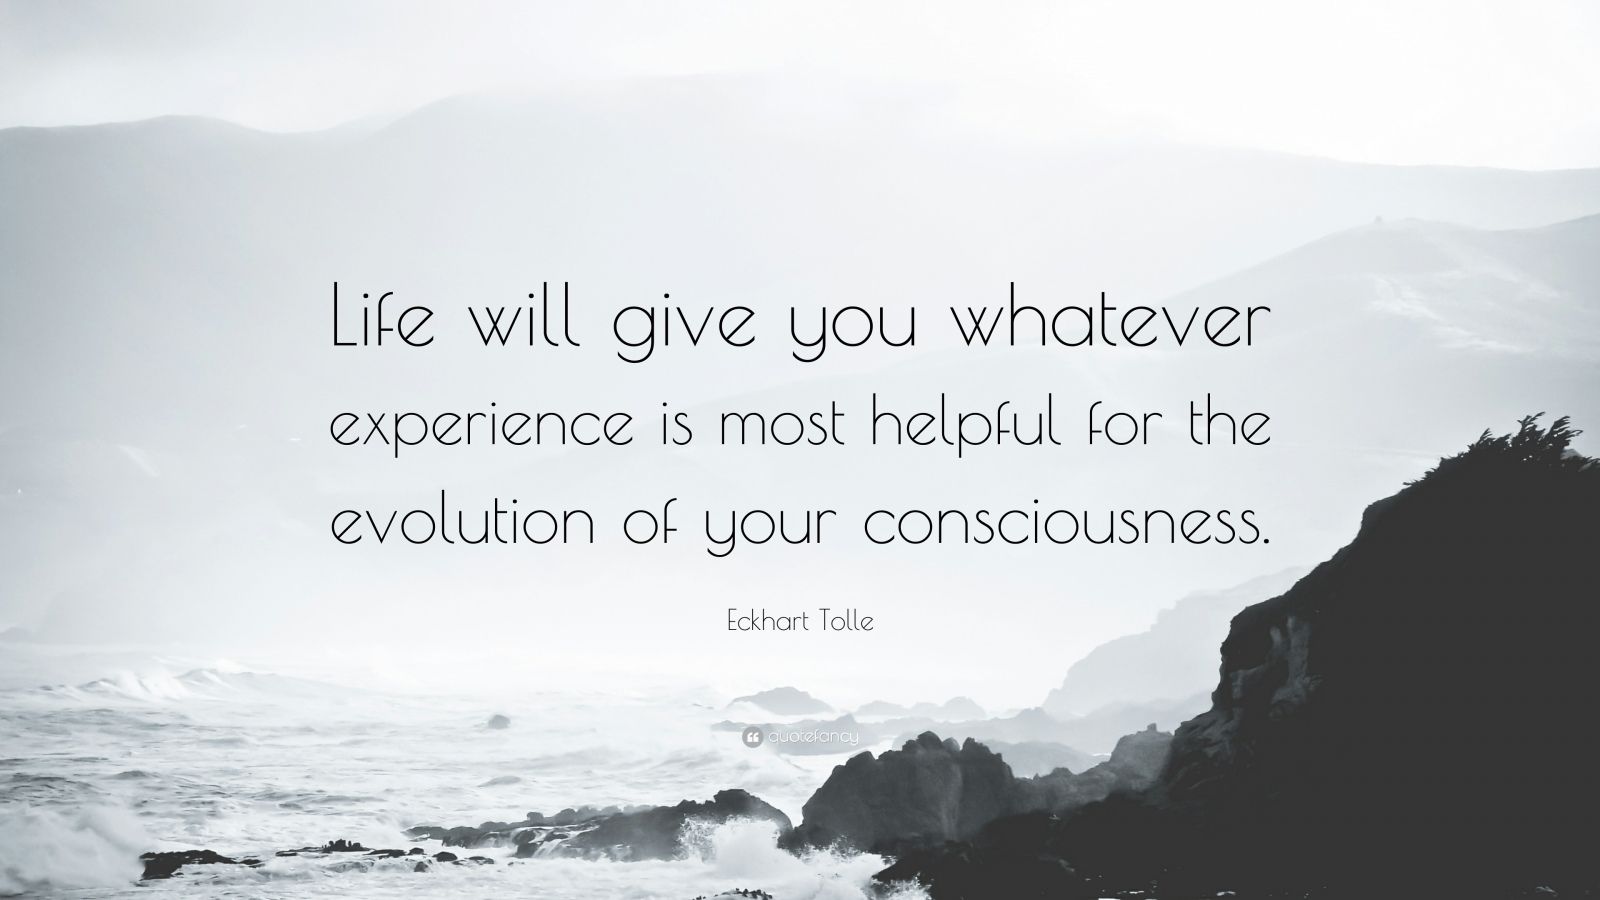 Eckhart Tolle Quote “Life will give you whatever experience is most helpful for the